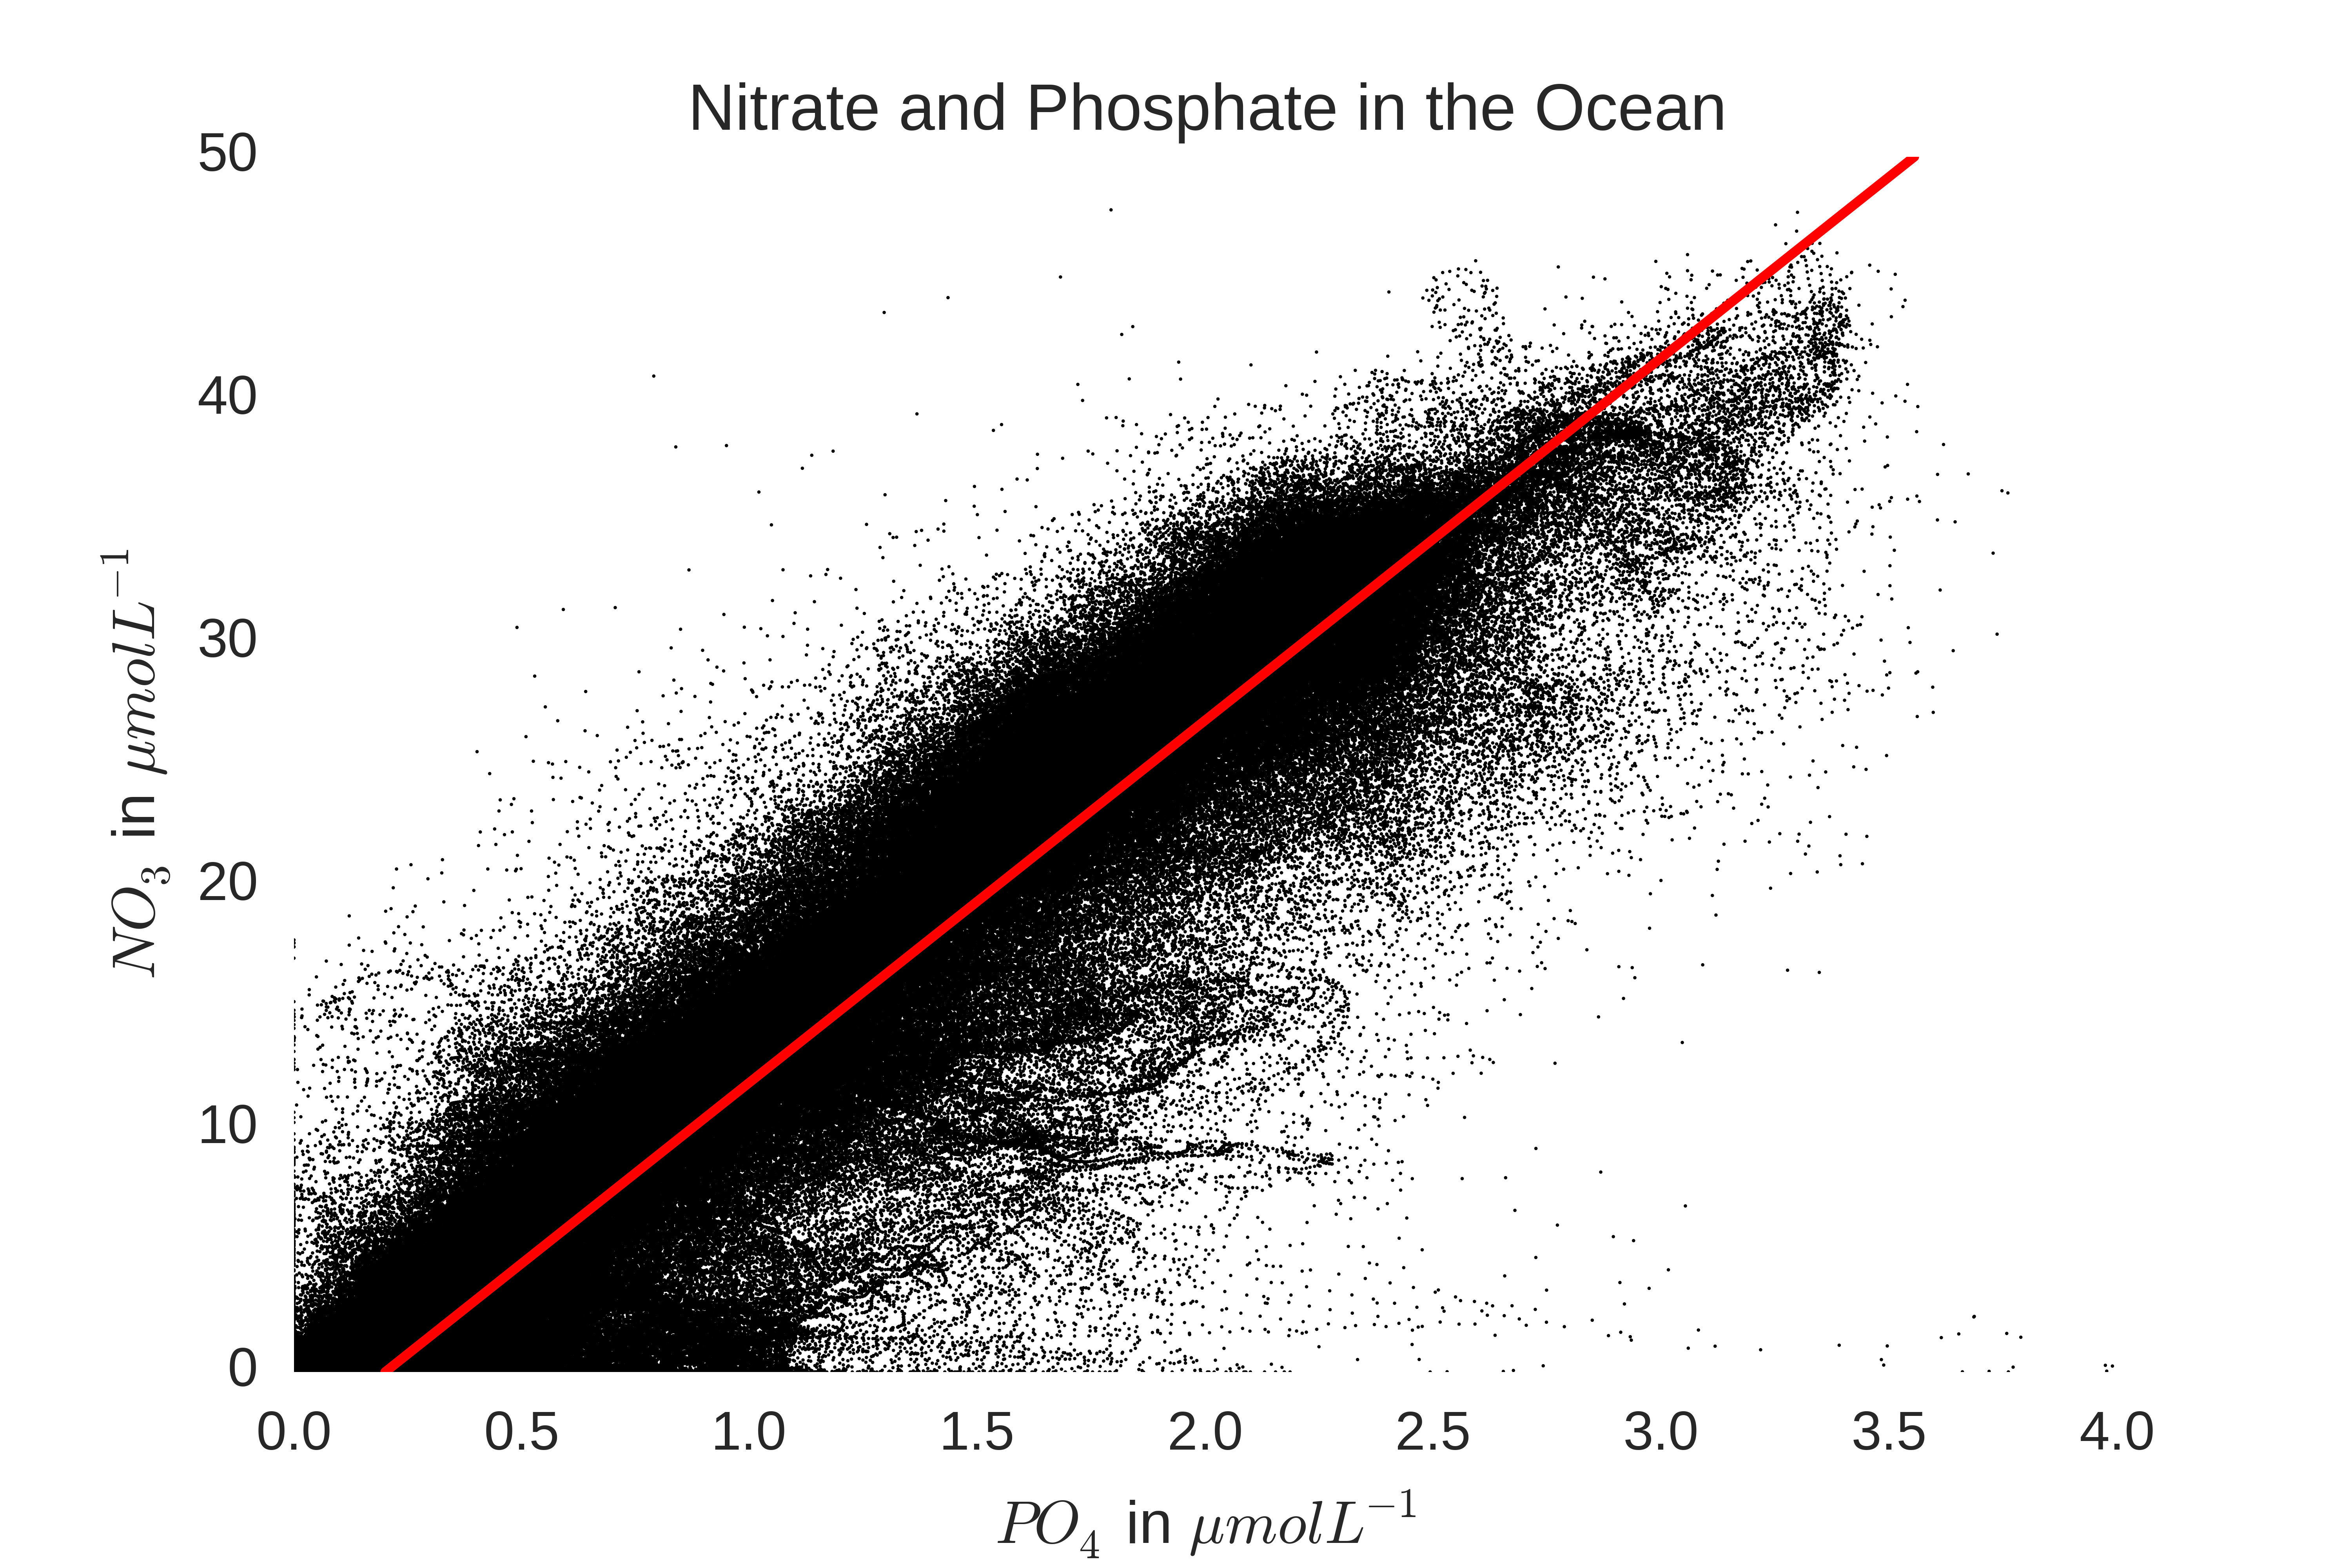 Plot of nitrate and phosphate measurements from the global ocean. Take note of the linear relationship and the fact that the intercept of the best fit line is close to the origin.